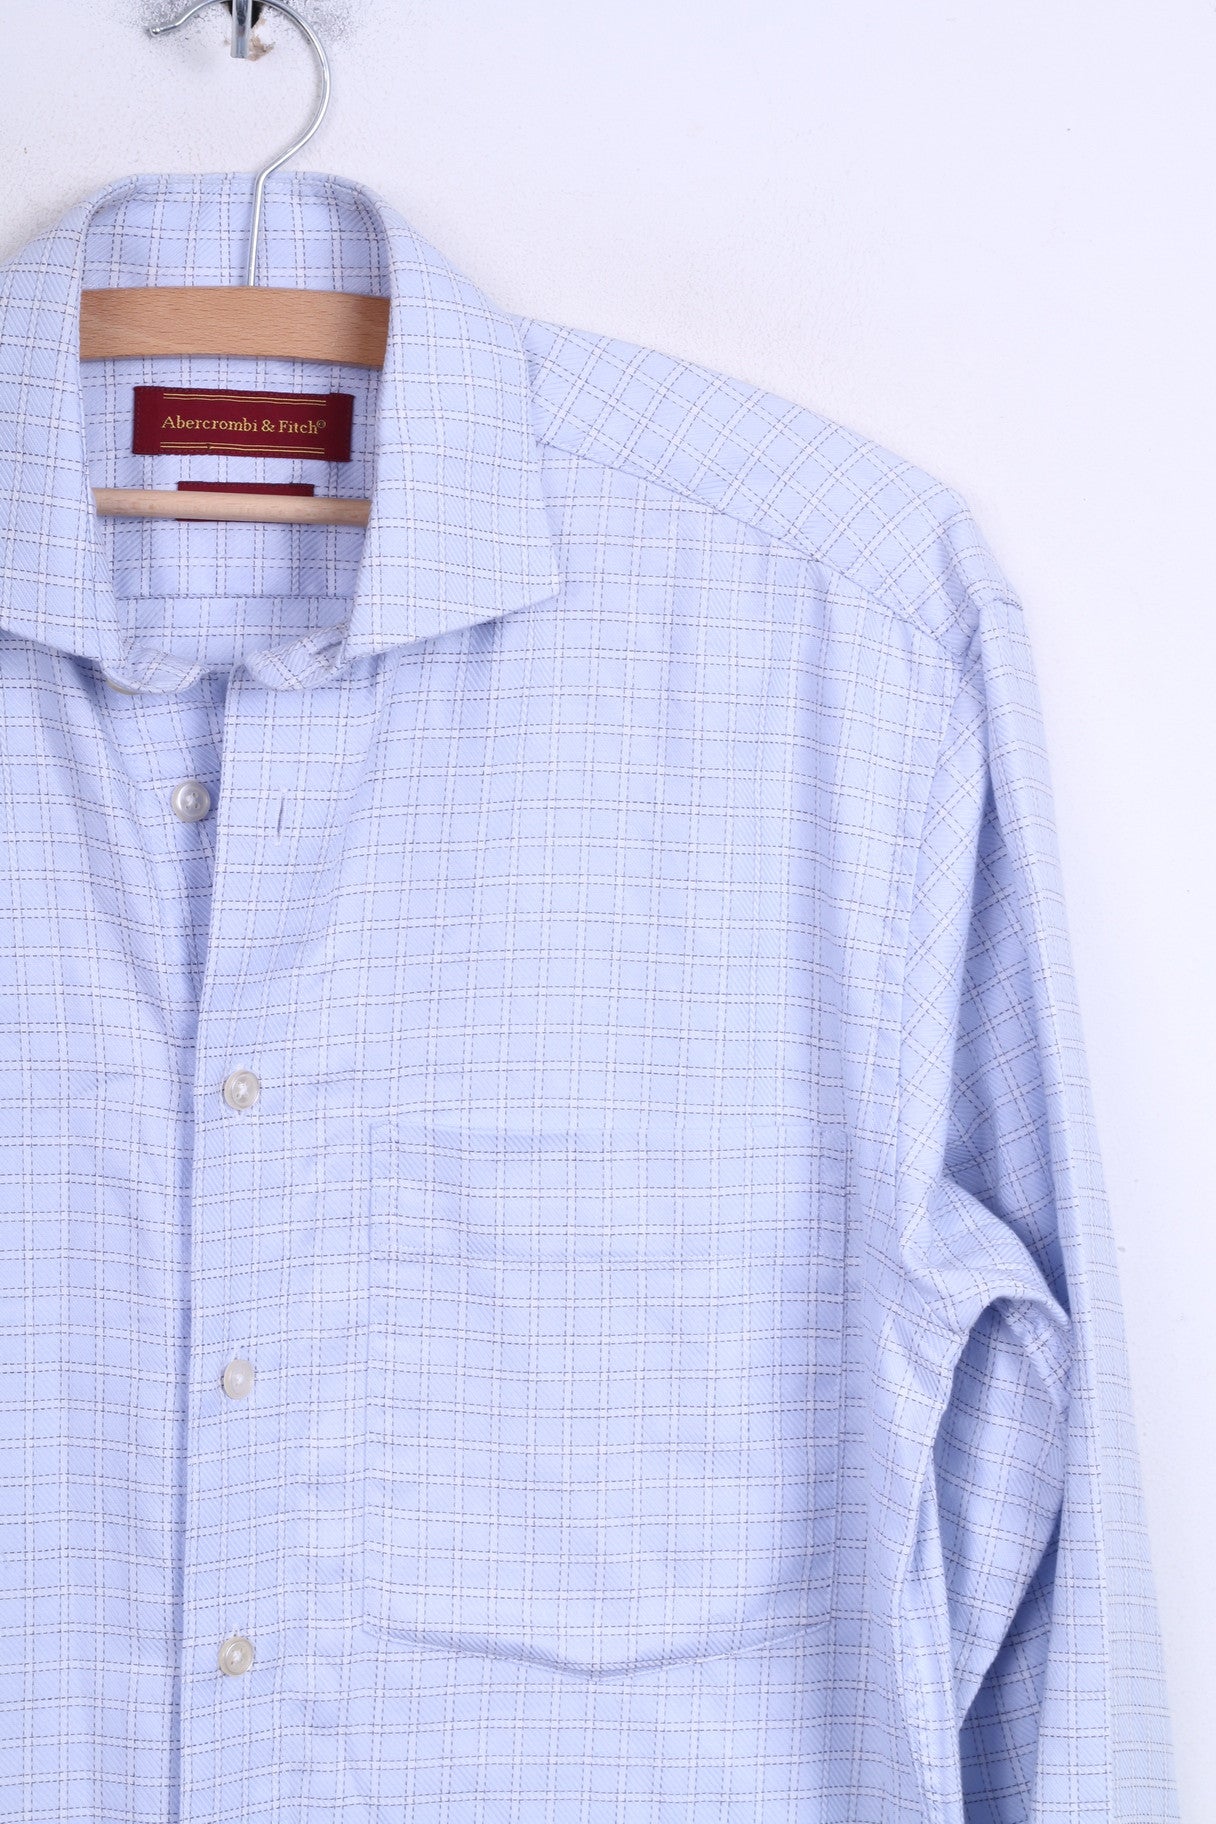 Abercrombi & Fitch Mens 38 M Casual Shirt Blue Check Long Sleeve